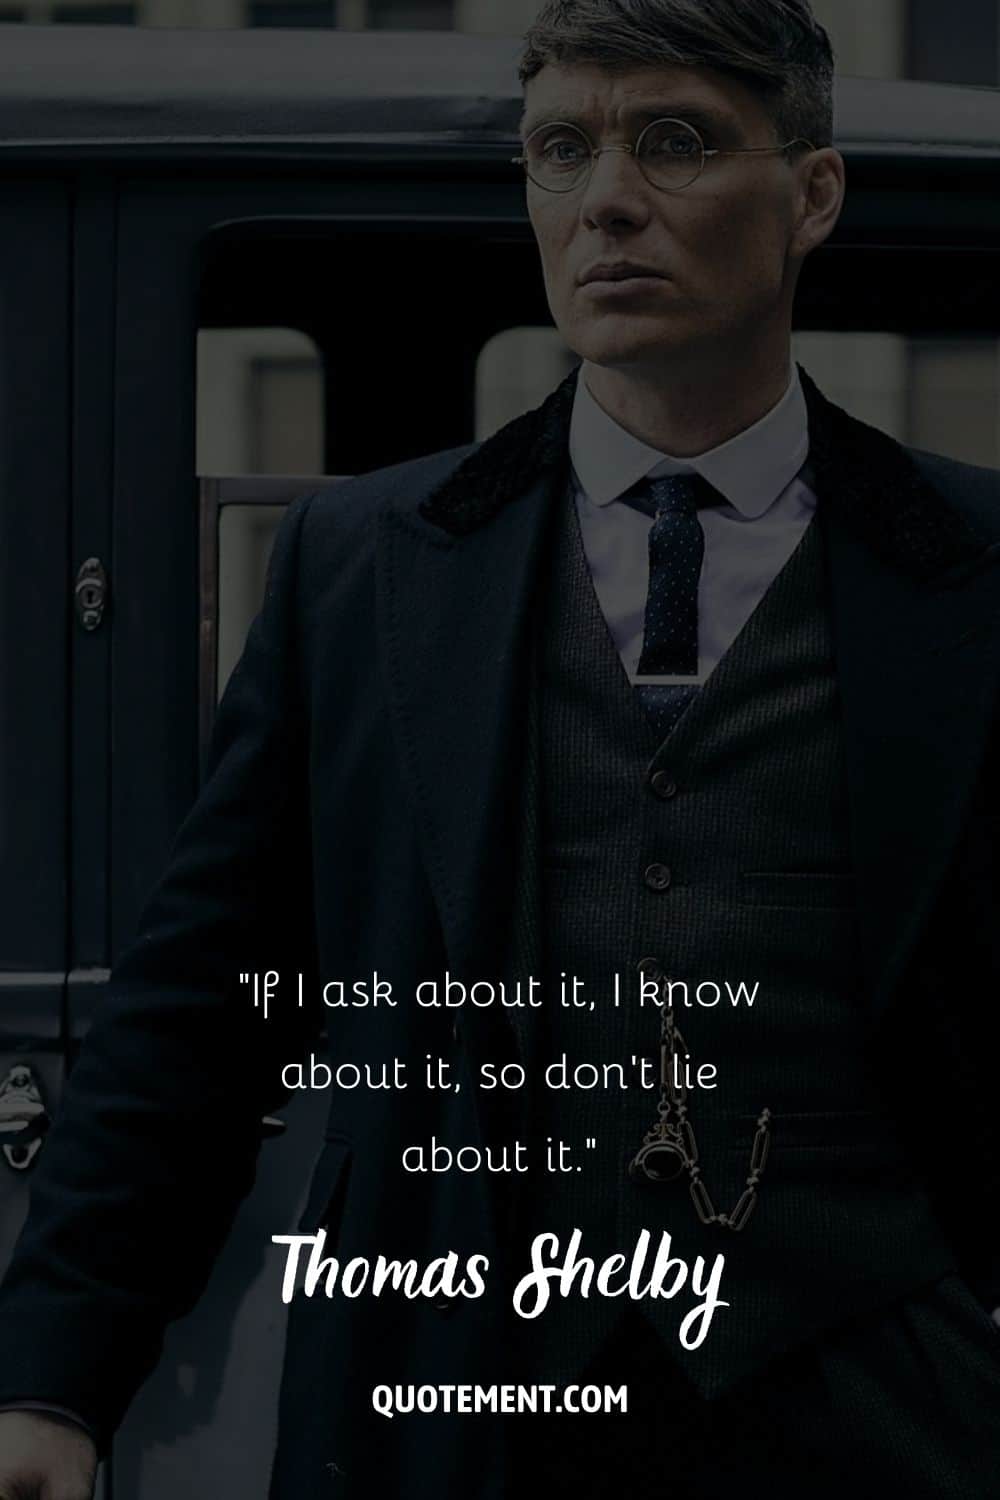 Cillian Murphy channeling the Peaky Blinder vibe representing peaky blinders thomas shelby quote
